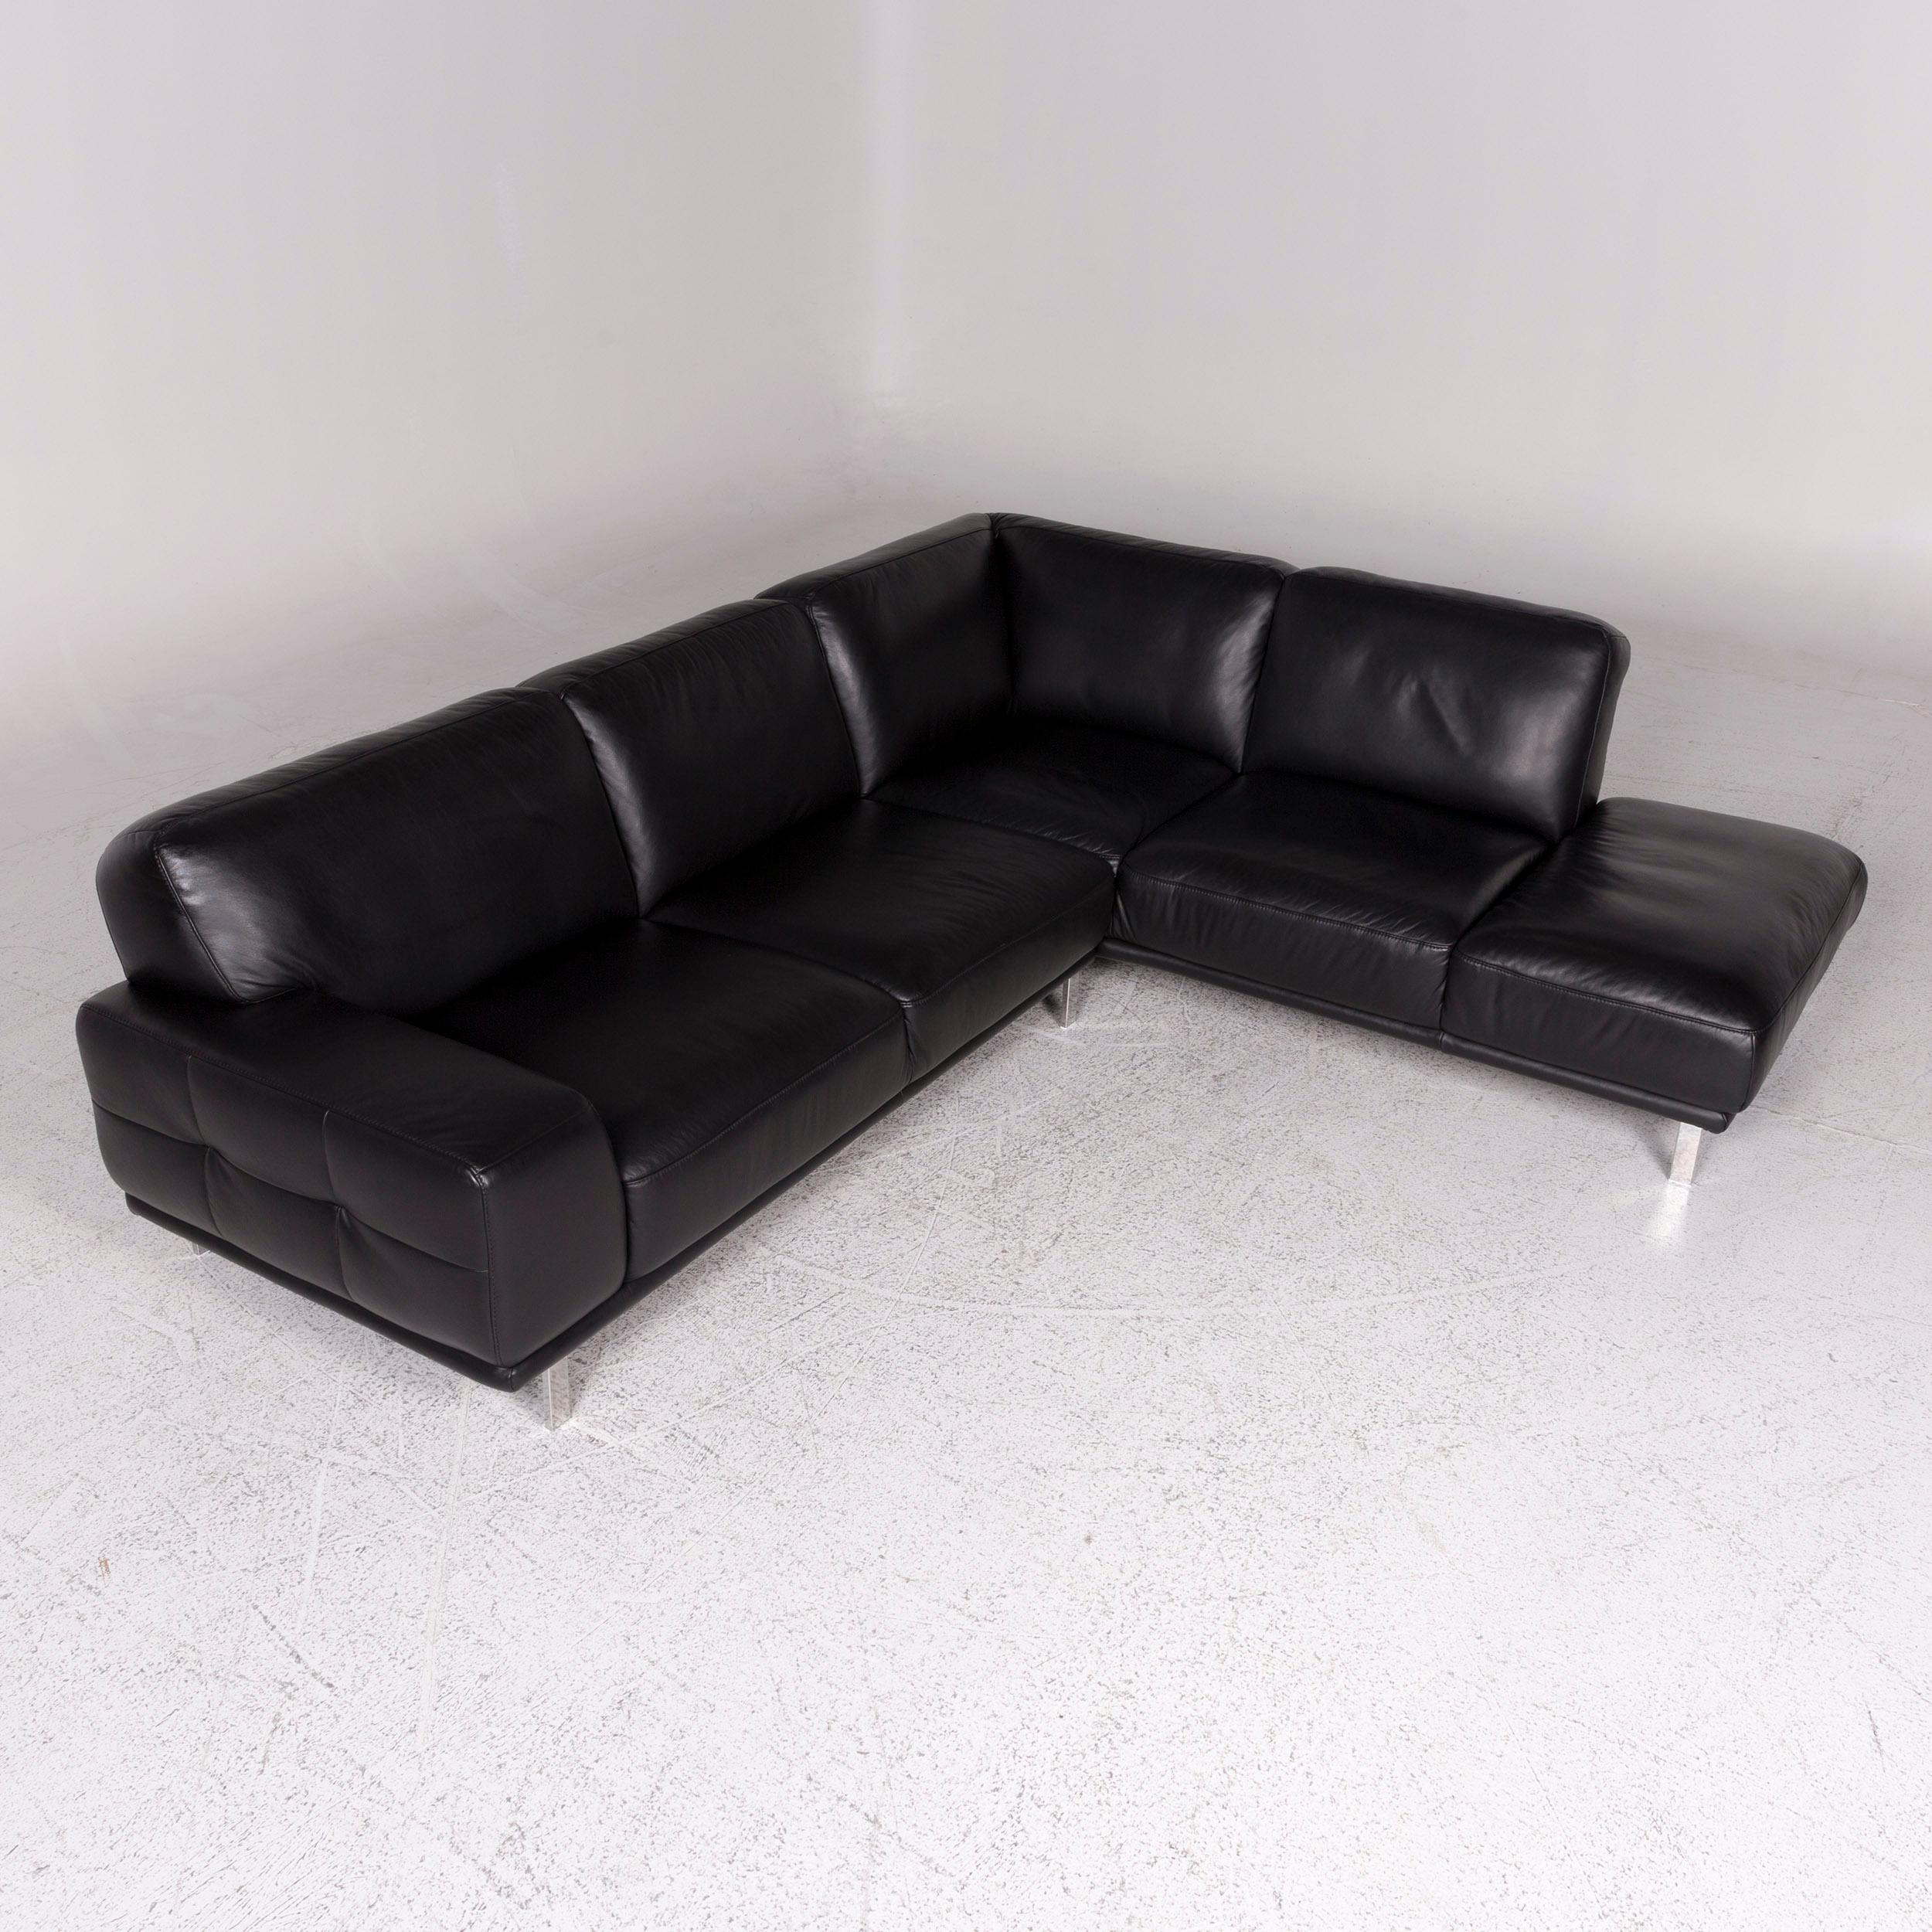 We bring to you a Willi Schillig leather sofa black corner sofa.

 
 Product measurements in centimeters:
 
 Depth 93
Width 262
Height 78
Seat-height 43
Rest-height 54
Seat-depth 58
Seat-width 200
Back-height 38.
  